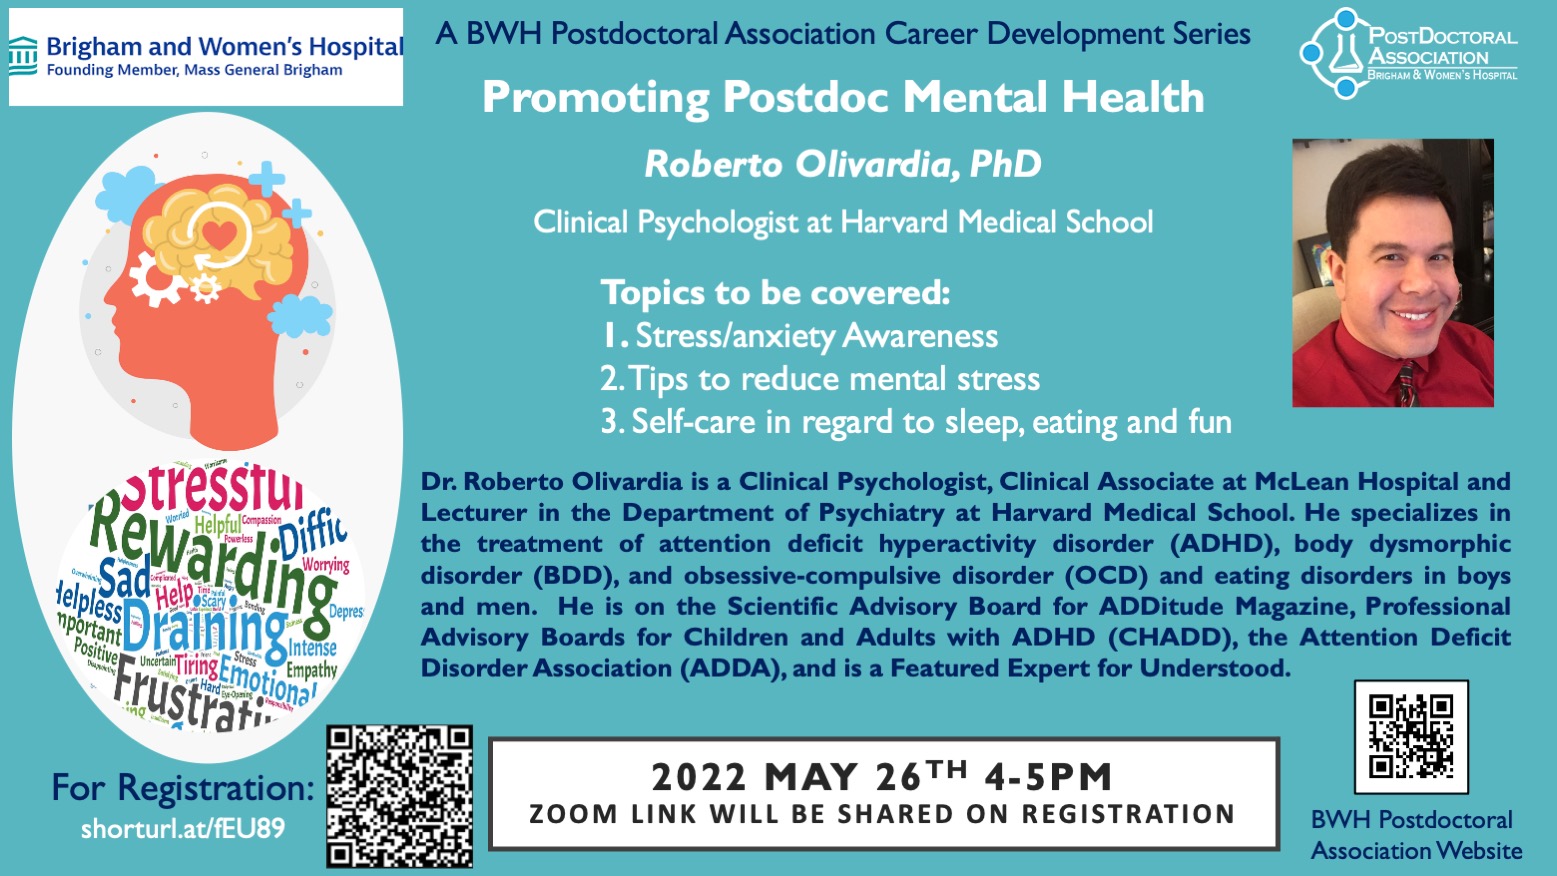 Flyer for May 26, 2022 event: Promoting Postdoc Mental Health as part of the BWHPDA Career Development Series.